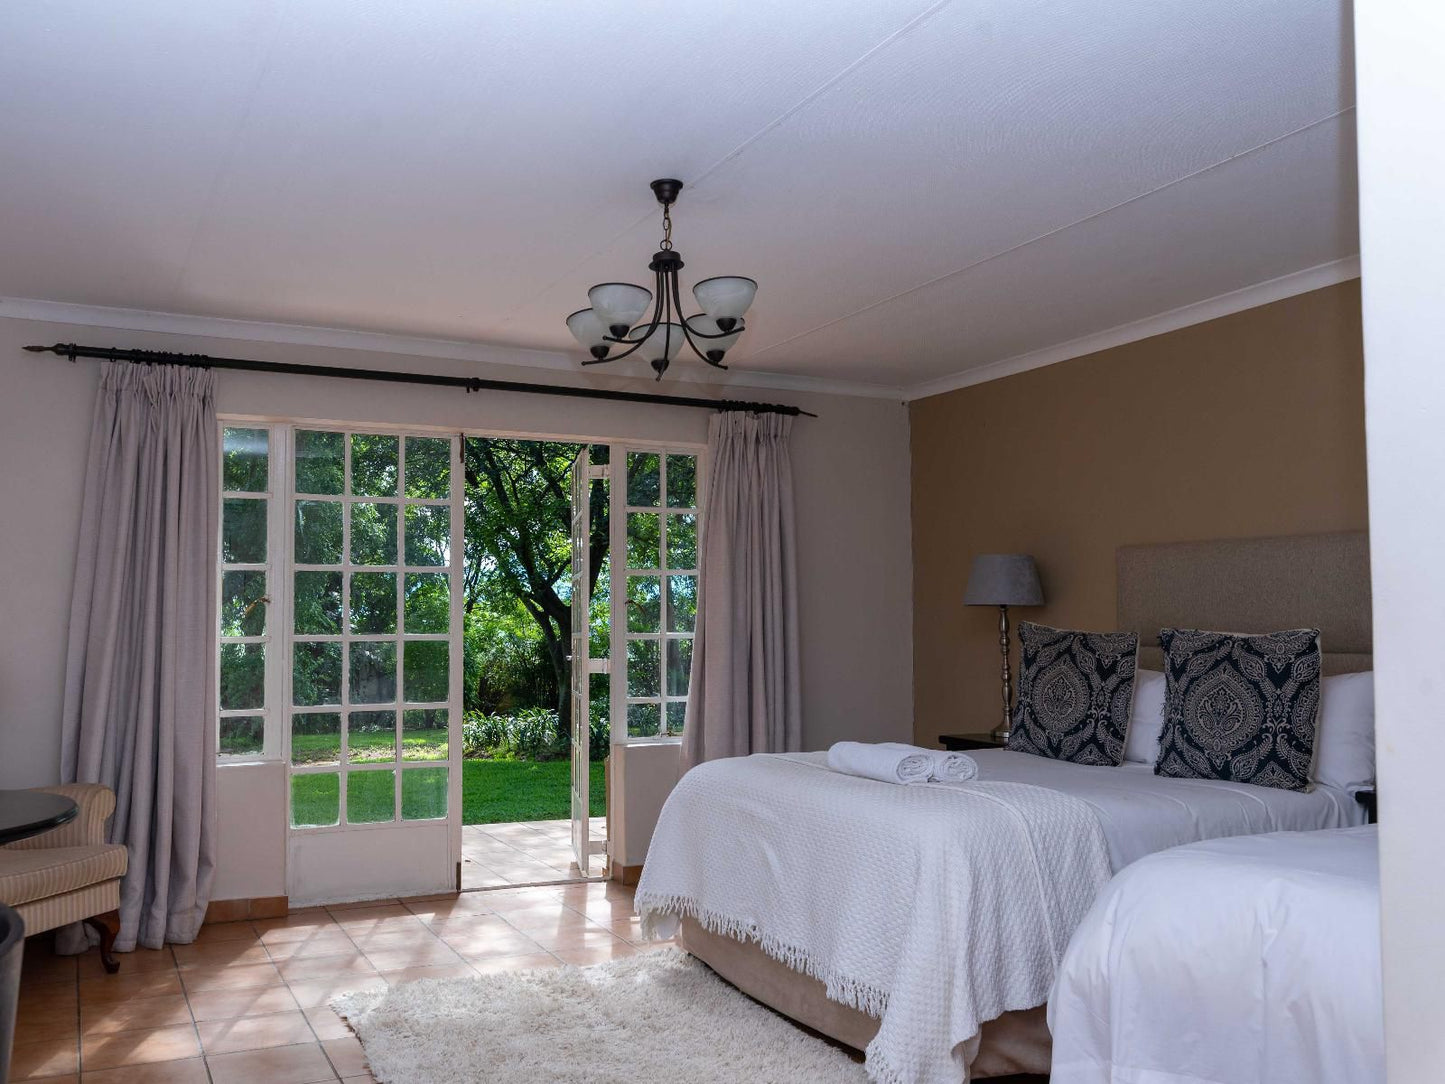 Huttenheights Guestlodge By Ilawu Hutten Heights Newcastle Kwazulu Natal South Africa House, Building, Architecture, Bedroom